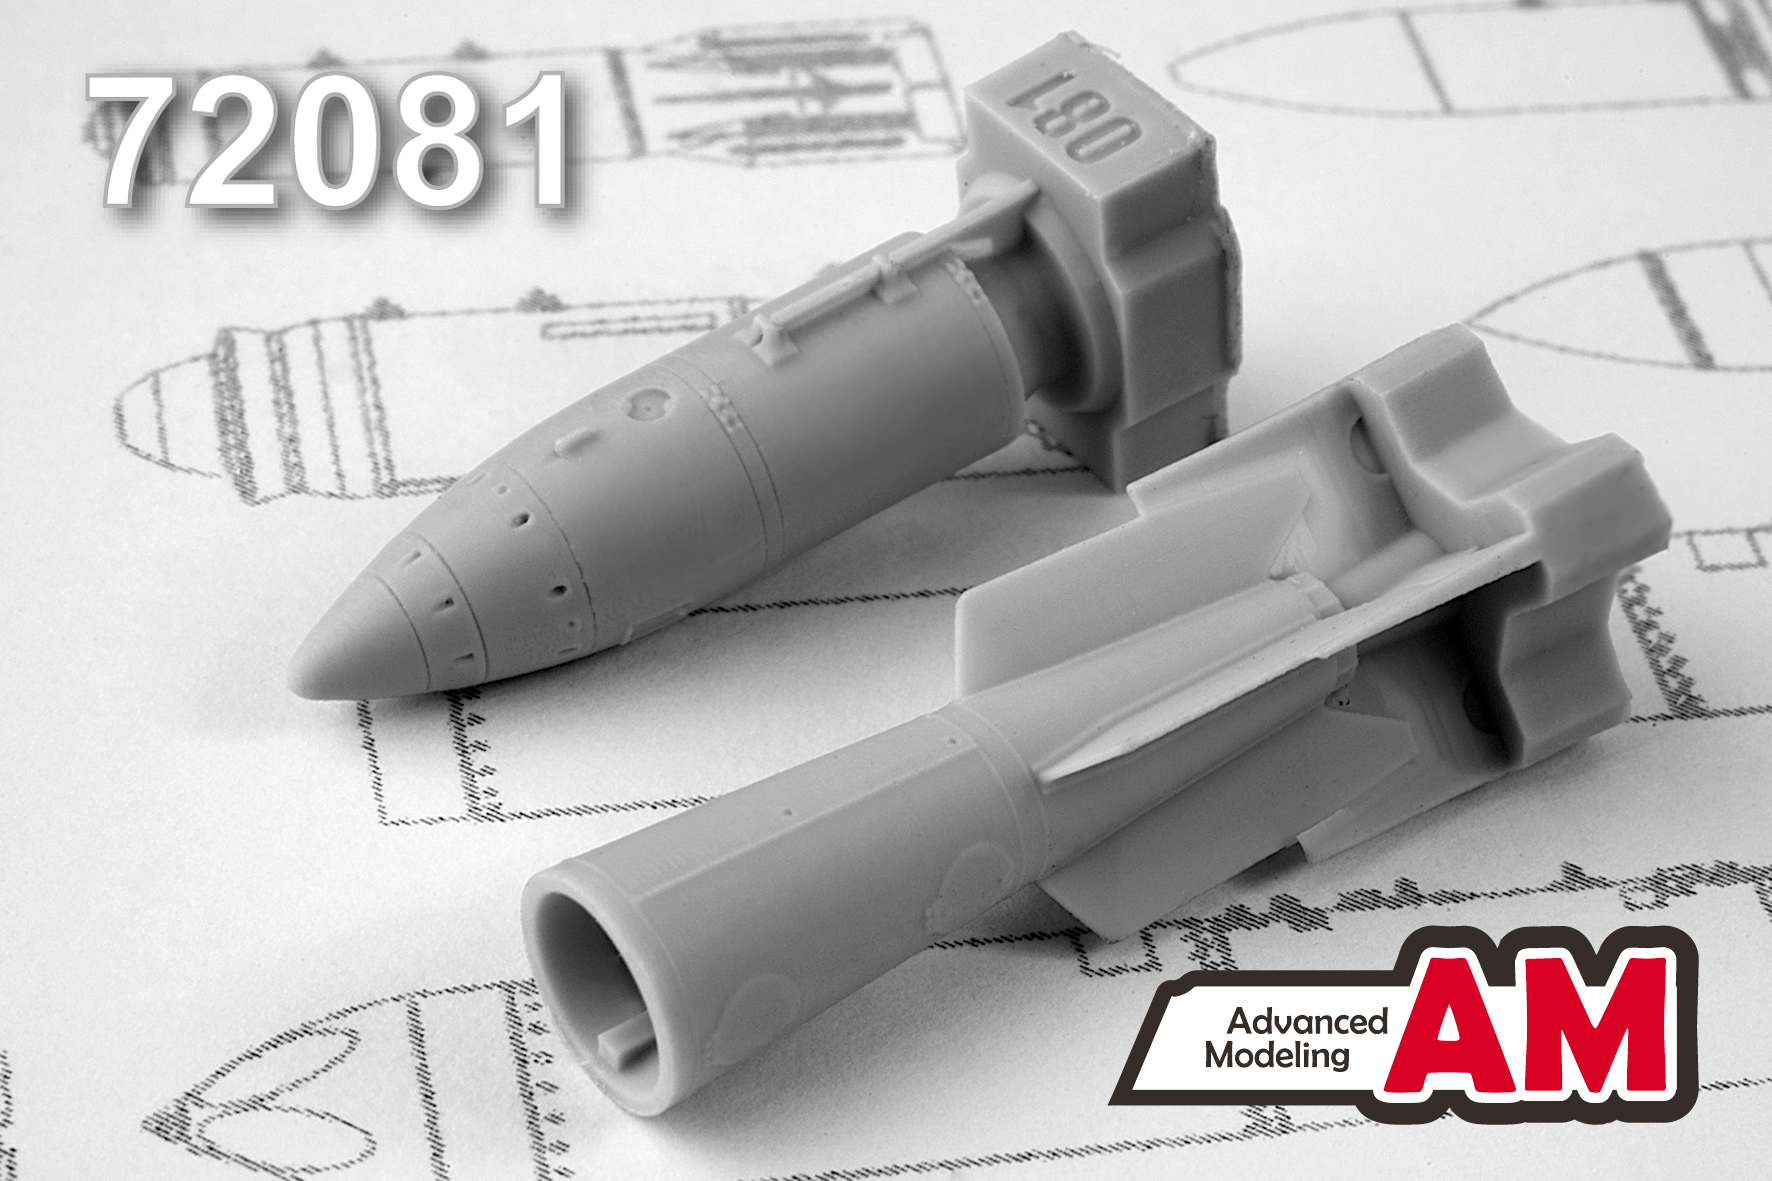 Additions (3D resin printing) 1/72 RN-28 special munition (Advanced Modeling) 